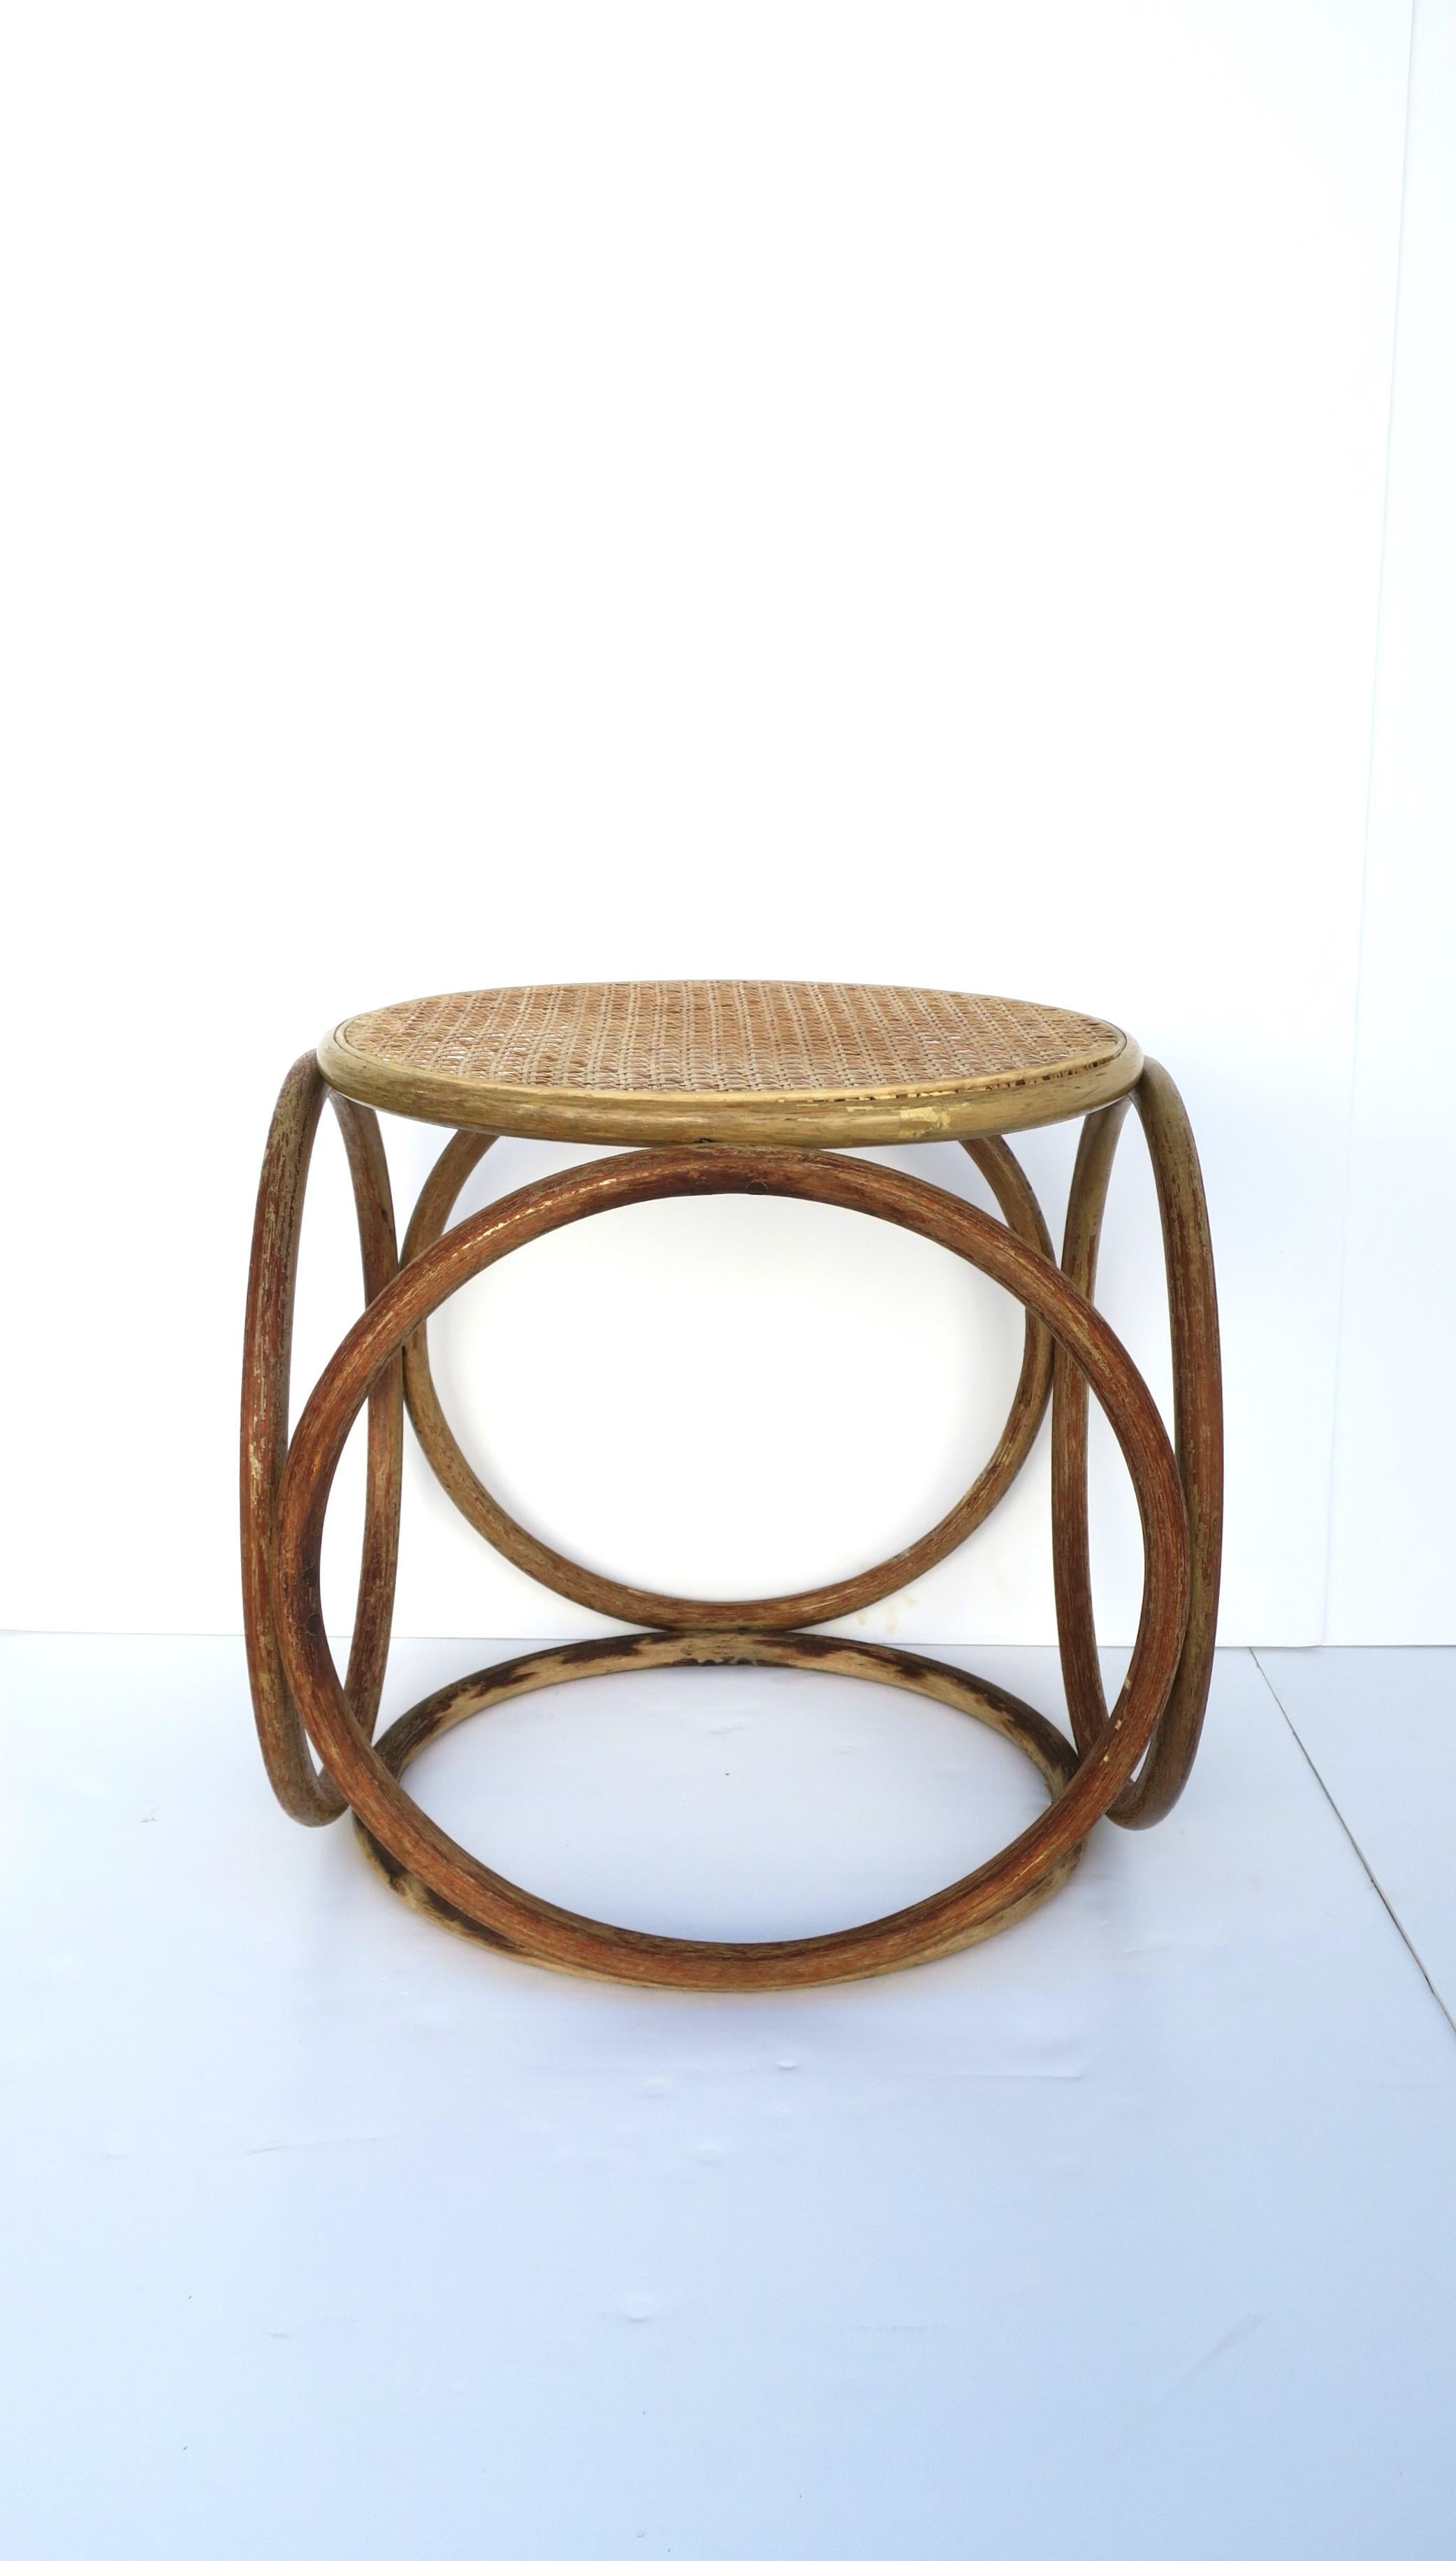 A beautiful modern bentwood and cane top stool or side drinks table, in the style of Thonet, circa early to Mid-20th Century, Europe, possibly Austria. This stool or table has a weather bentwood frame and blonde cane top. Great as a side drinks